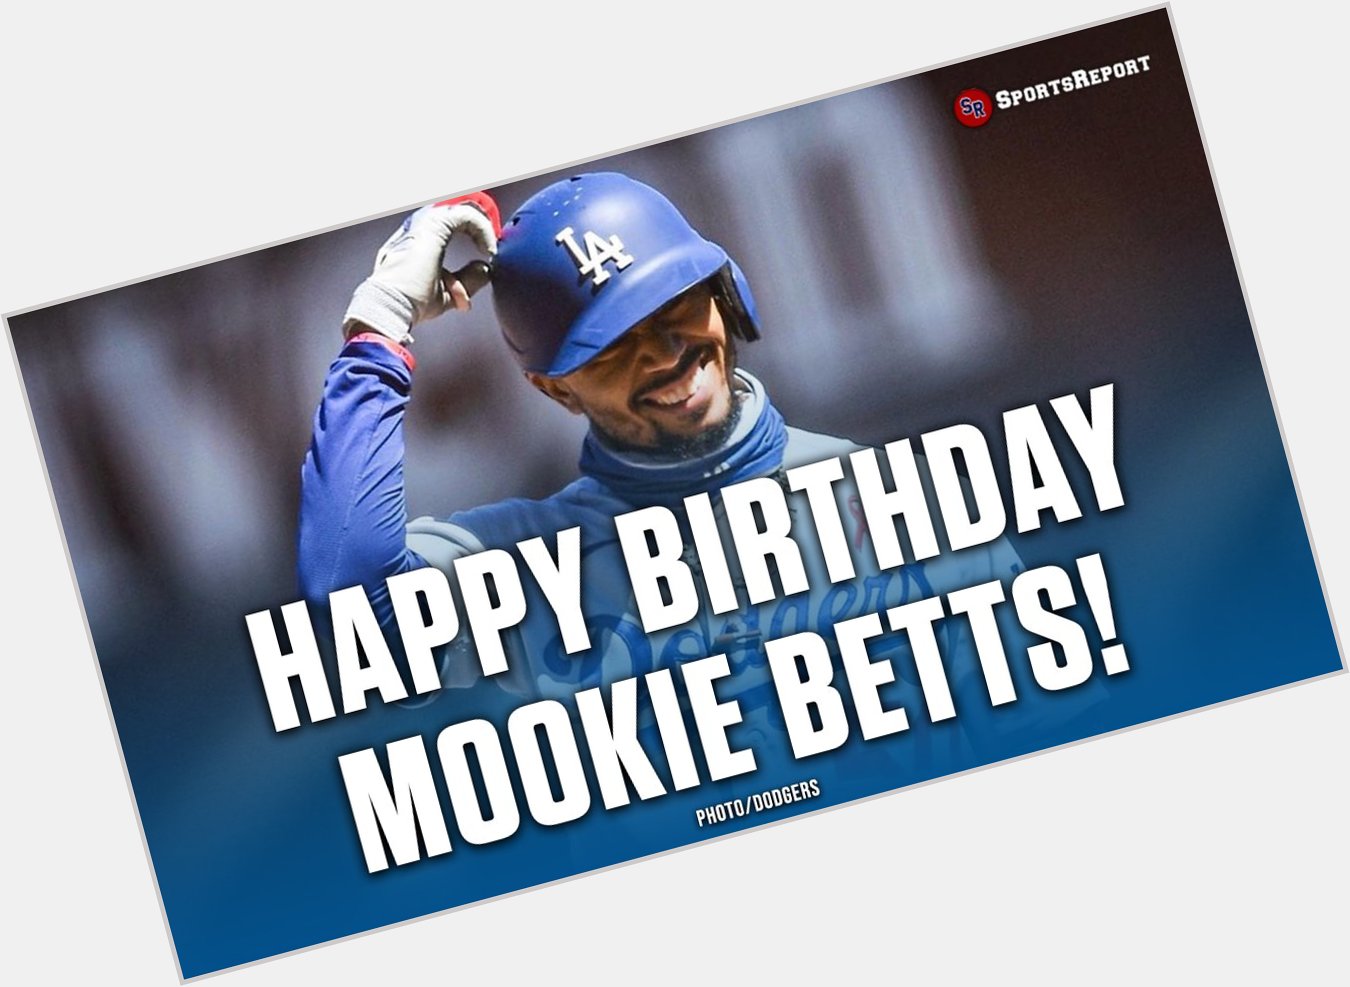  Fans, let\s wish Mookie Betts a Happy Birthday! GO DODGERS!! 